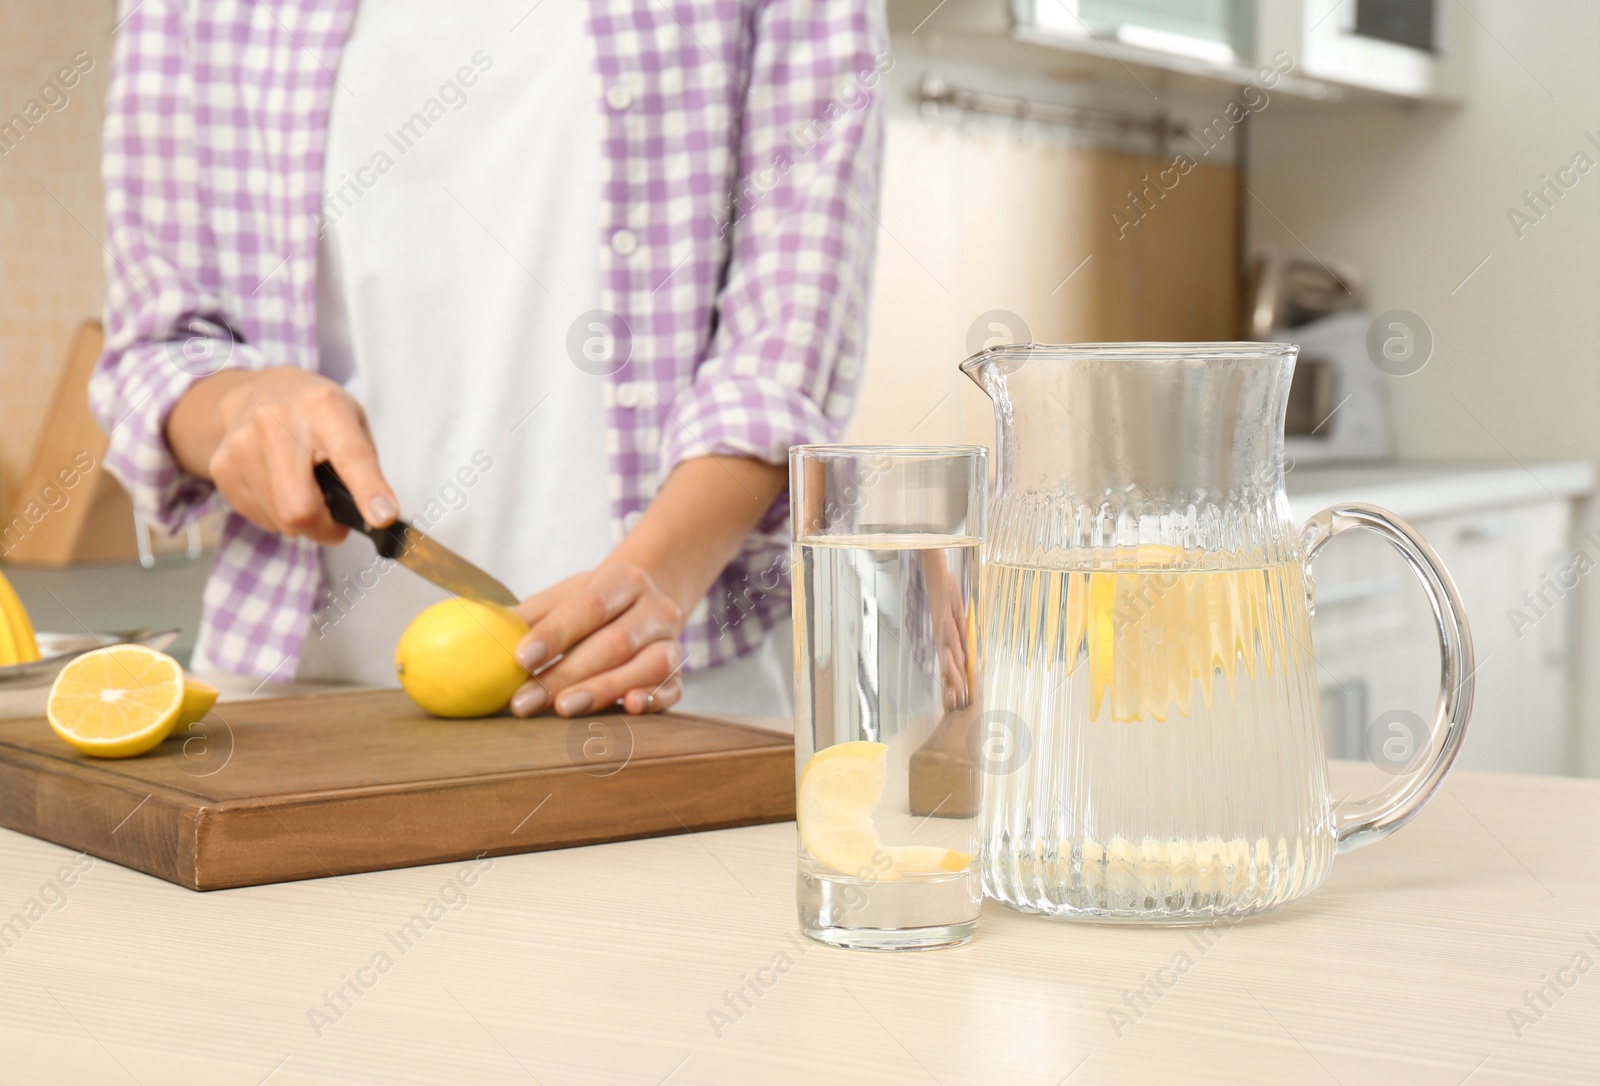 Photo of Young woman making lemon water in kitchen, focus on jug and glass with drink